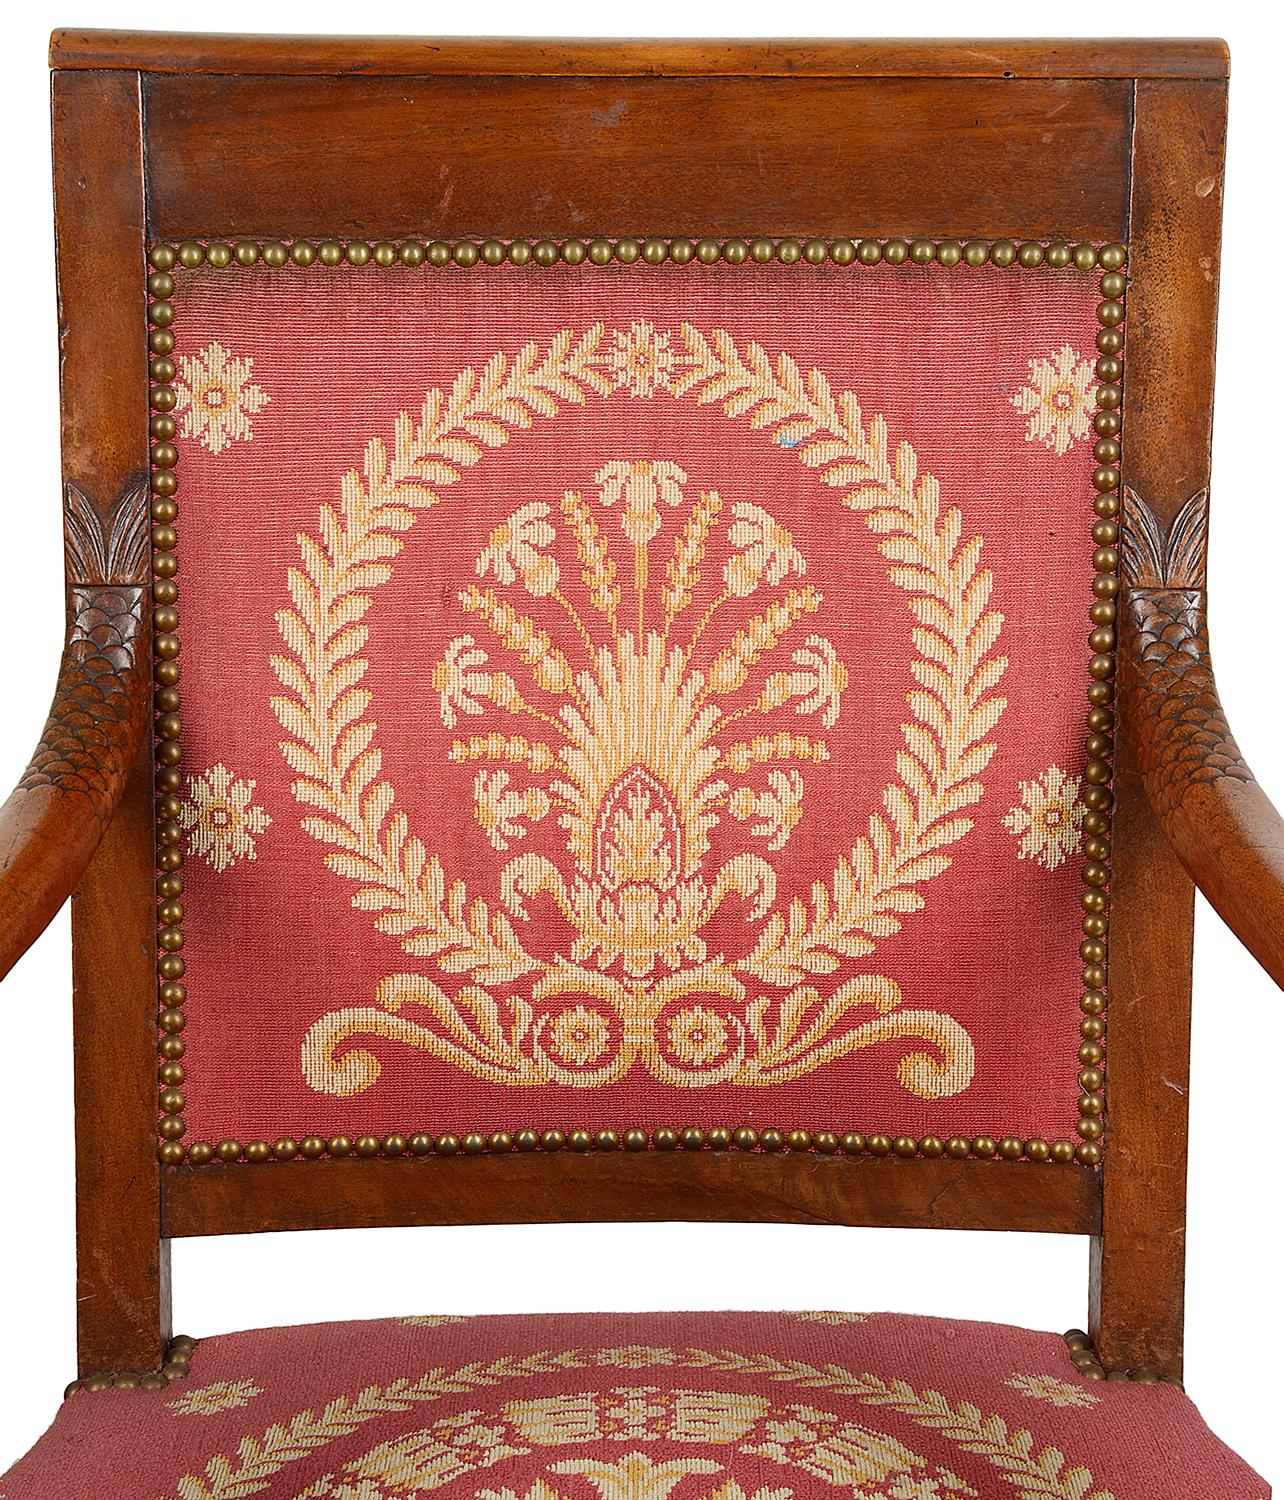 Matched Pair of French Empire Armchairs, 19th Century In Excellent Condition For Sale In Brighton, Sussex